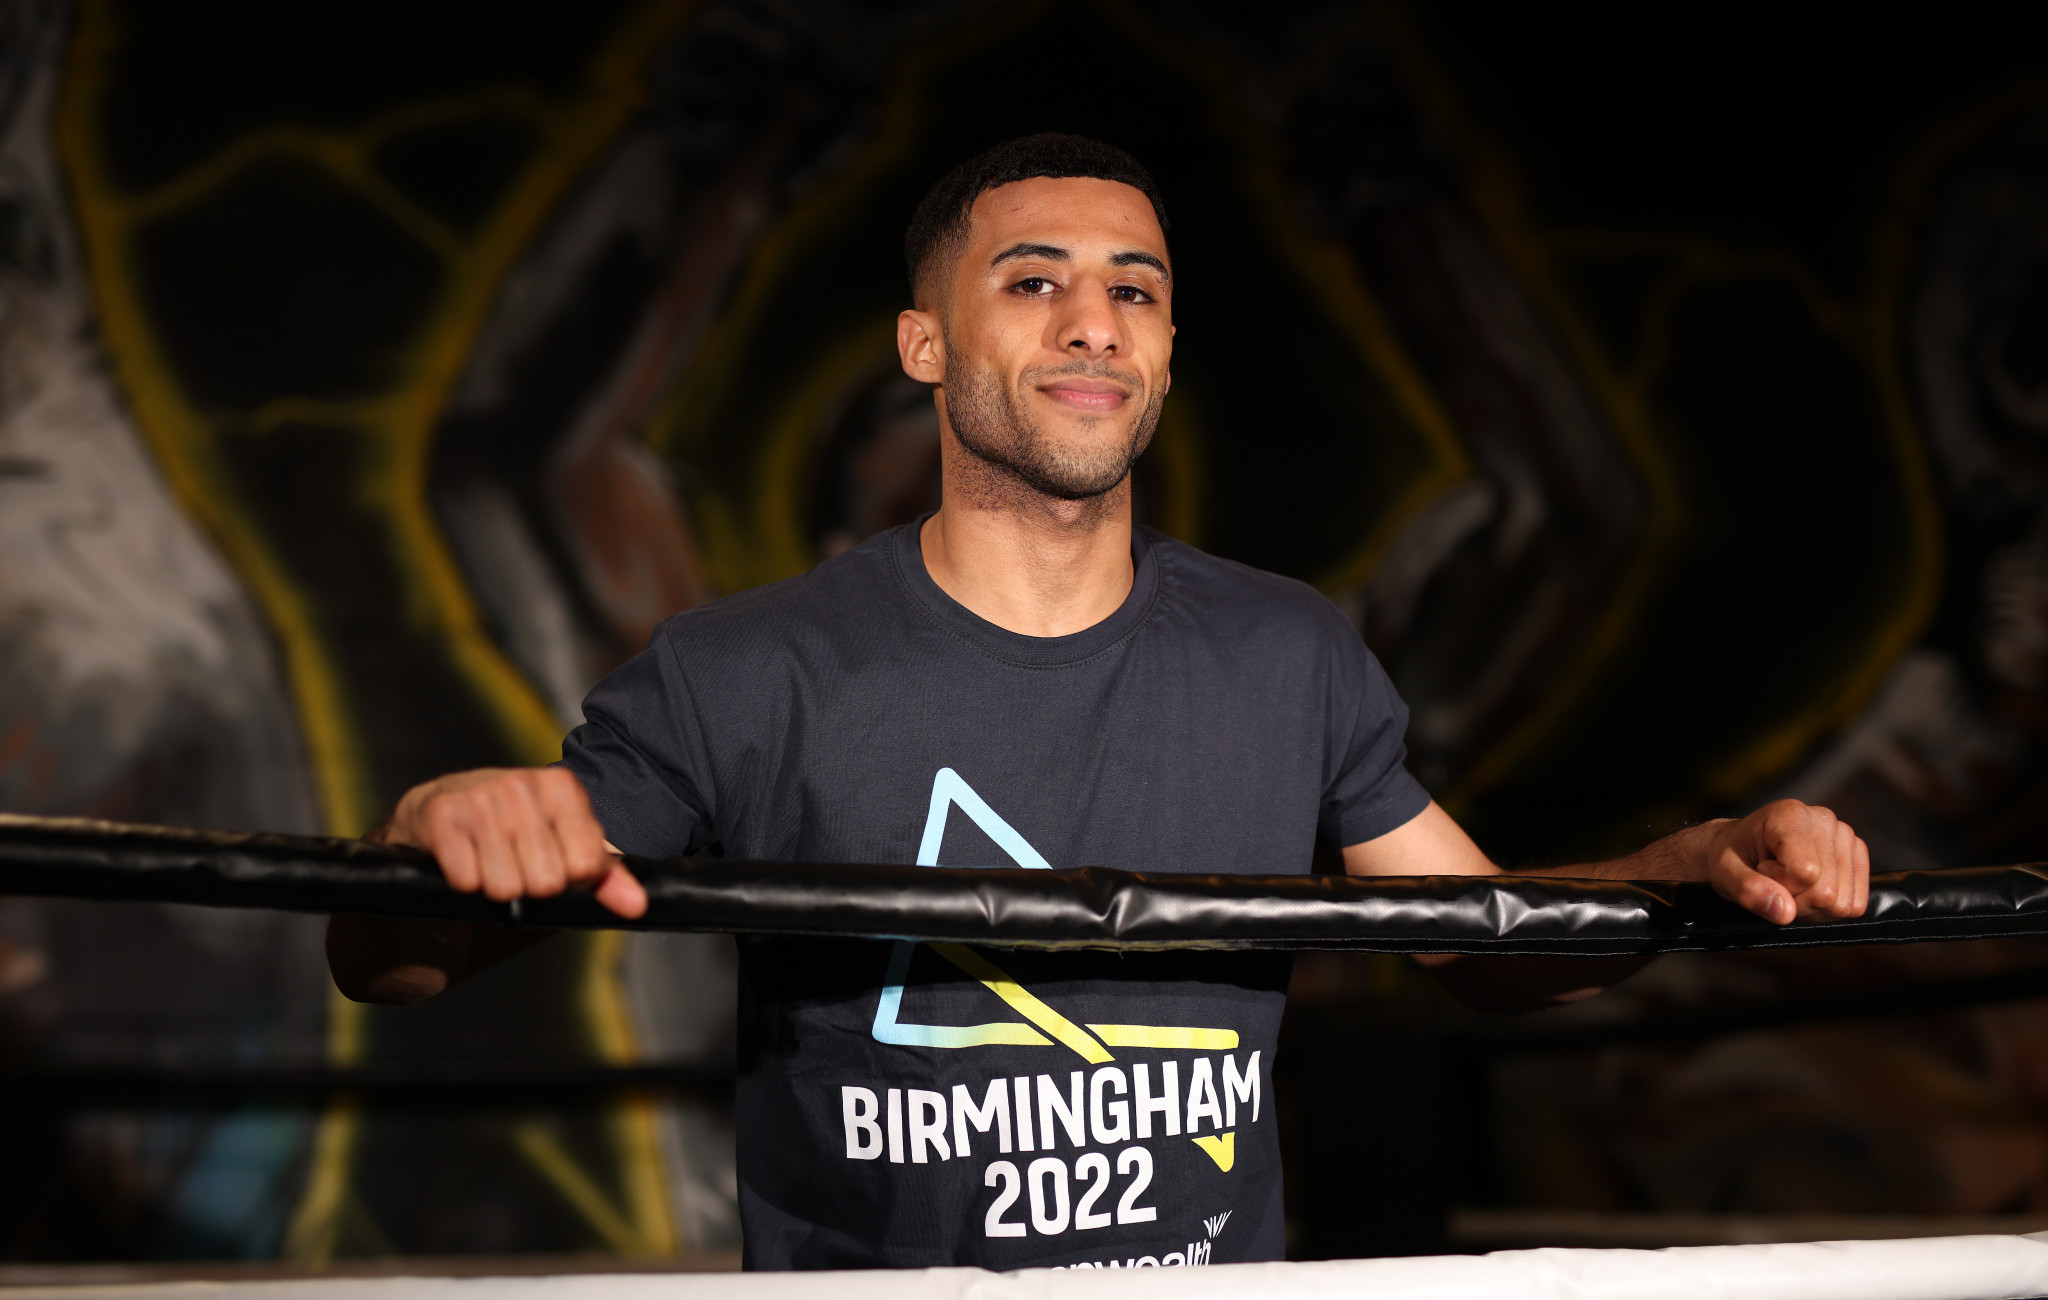 Birmingham-based boxer Galal Yafai is set to be one of the big names at next summer's Commonwealth Games ©Getty Images